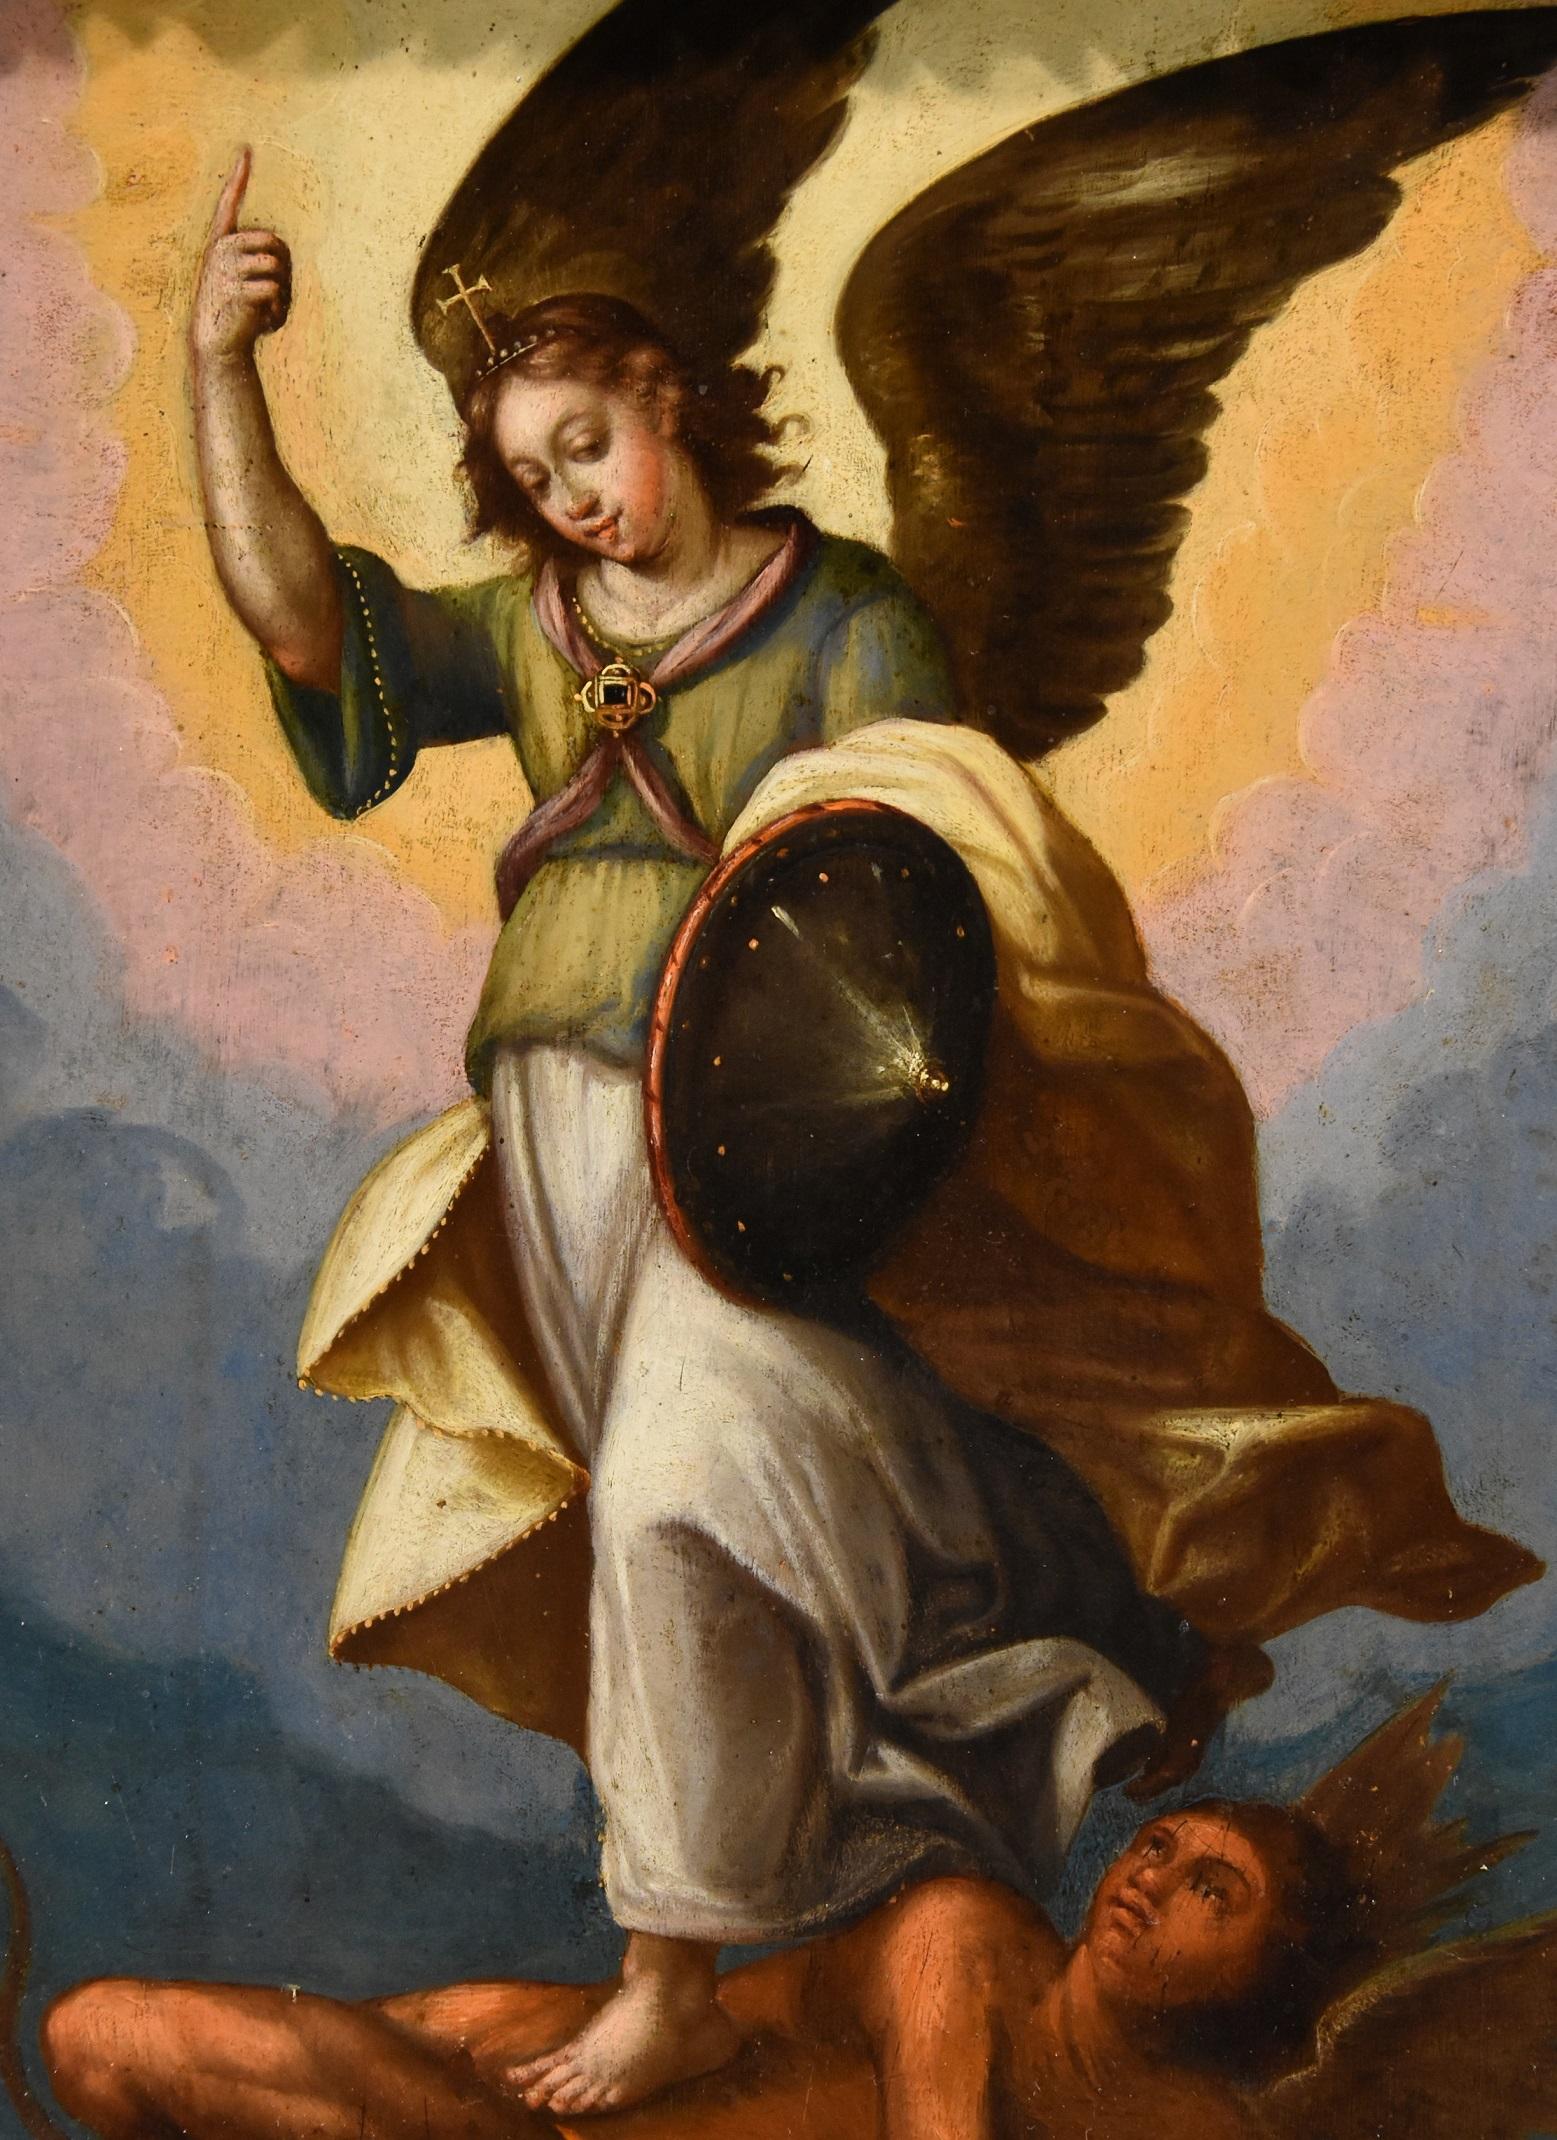 St Michael the Archangel defeating the devil
Maarten de Vos (Antwerp, 1532 - 1603) workshop

Late 16th - early 17th century

Oil on copper

30 x 22 cm. - in frame 40 x 34 cm.

The valuable copper painting we are presenting here, depicting St.